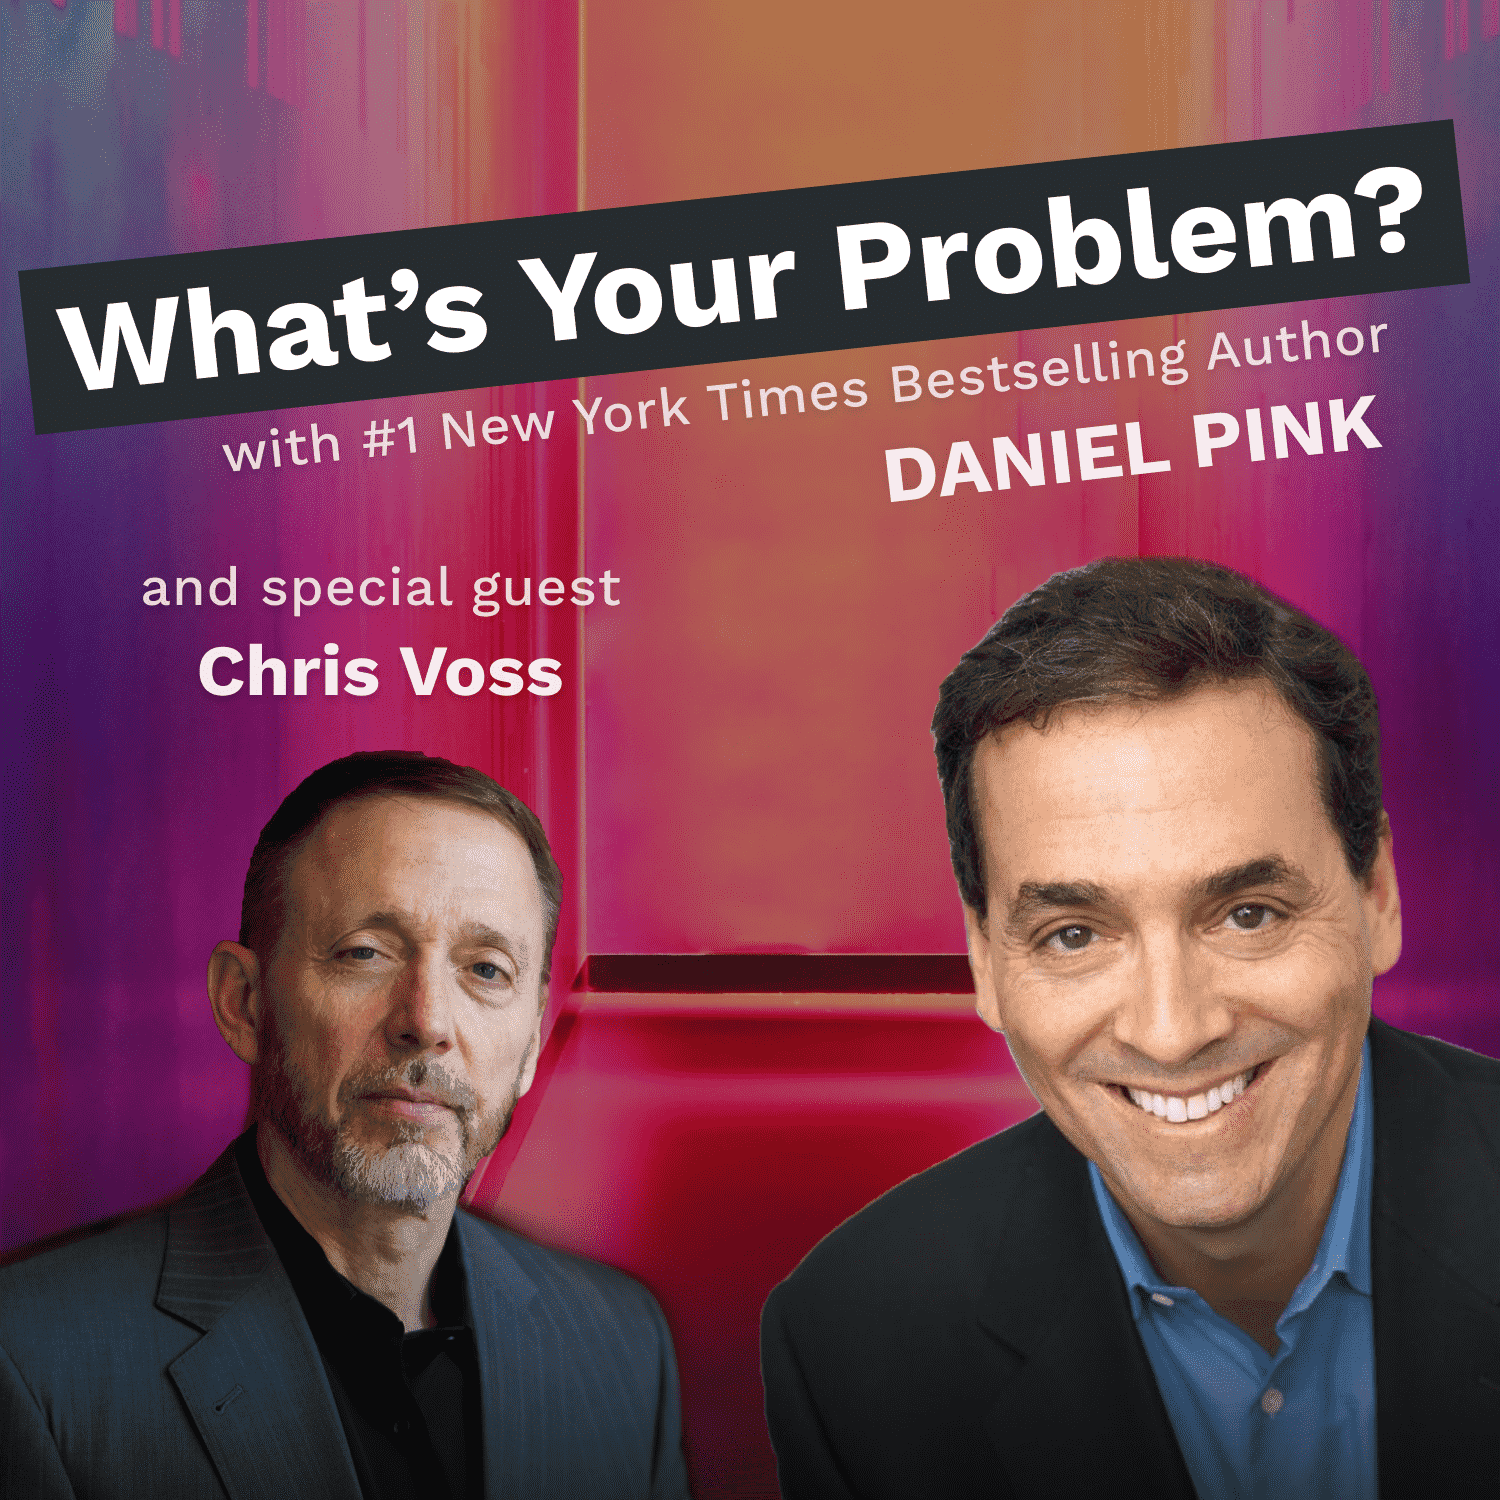 What's Your Problem? with special guest Chris Voss